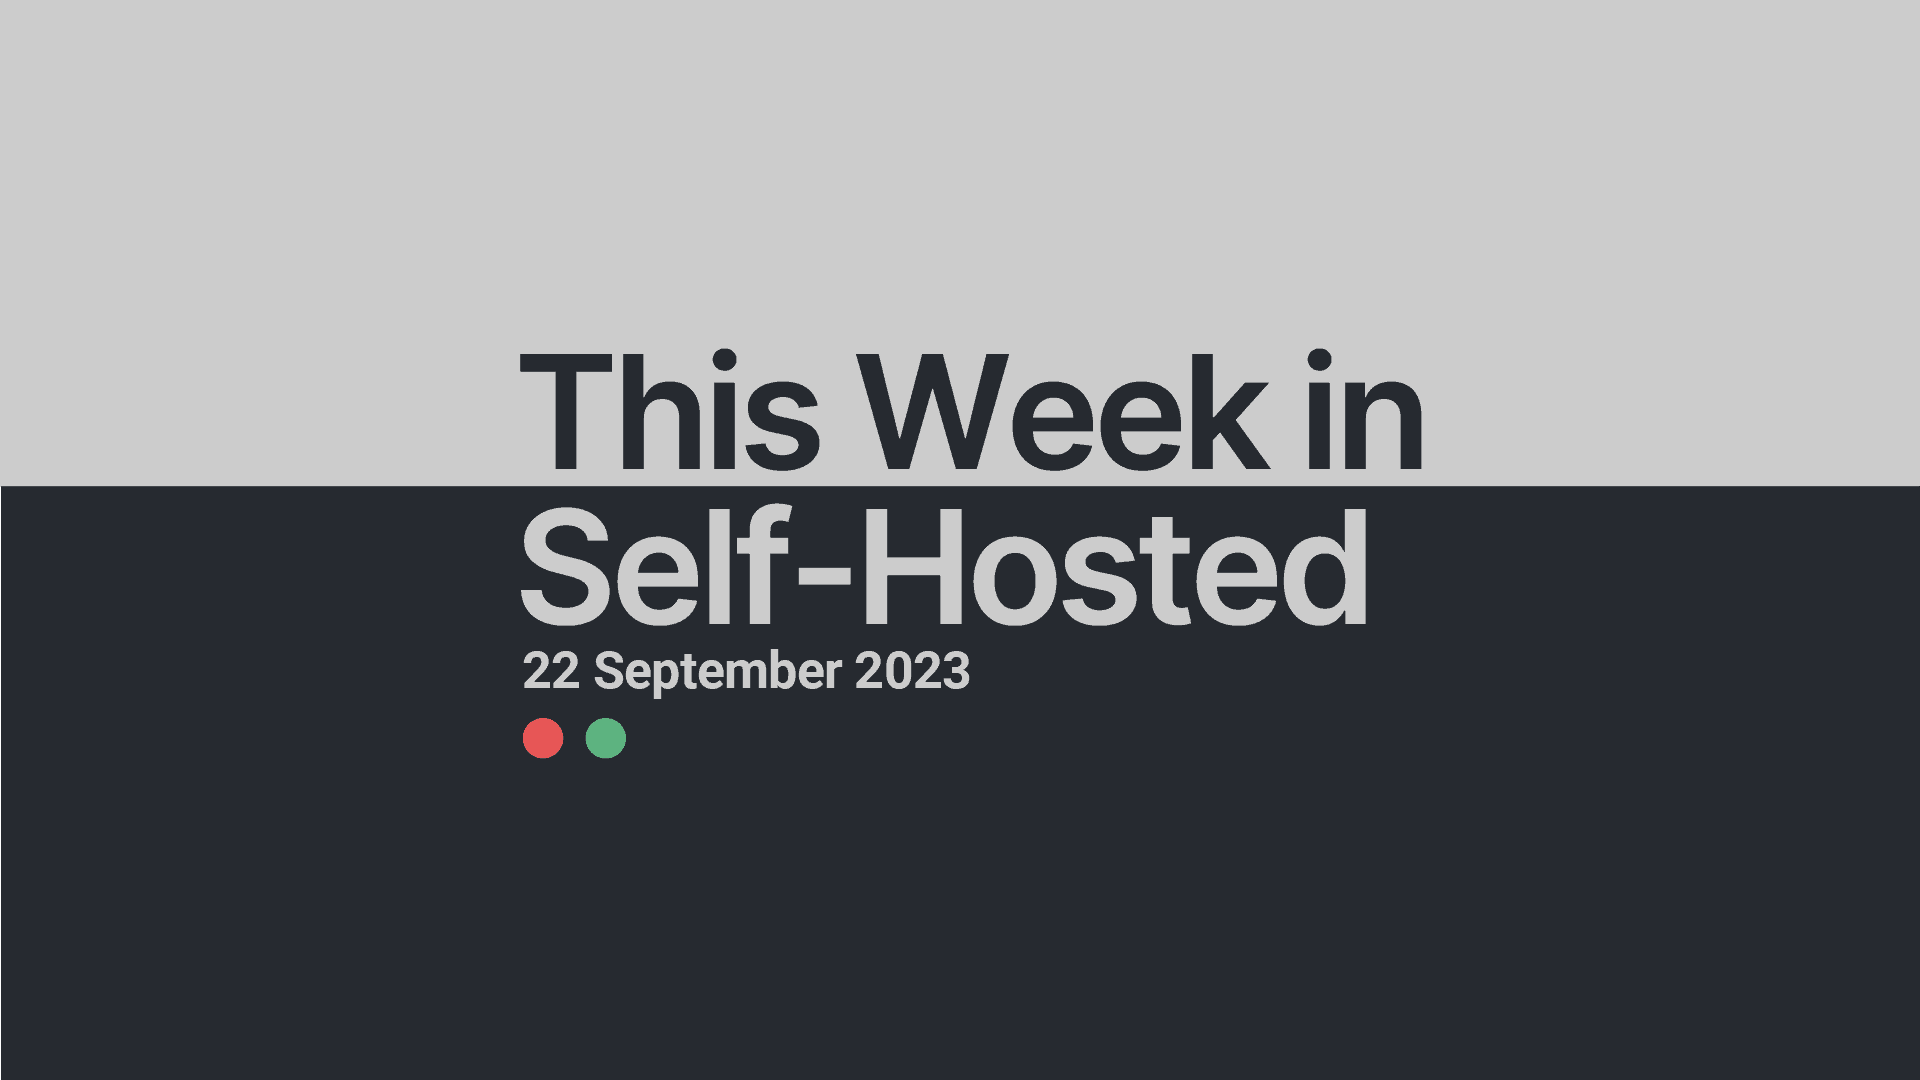 This Week in Self-Hosted (22 September 2023) Post image